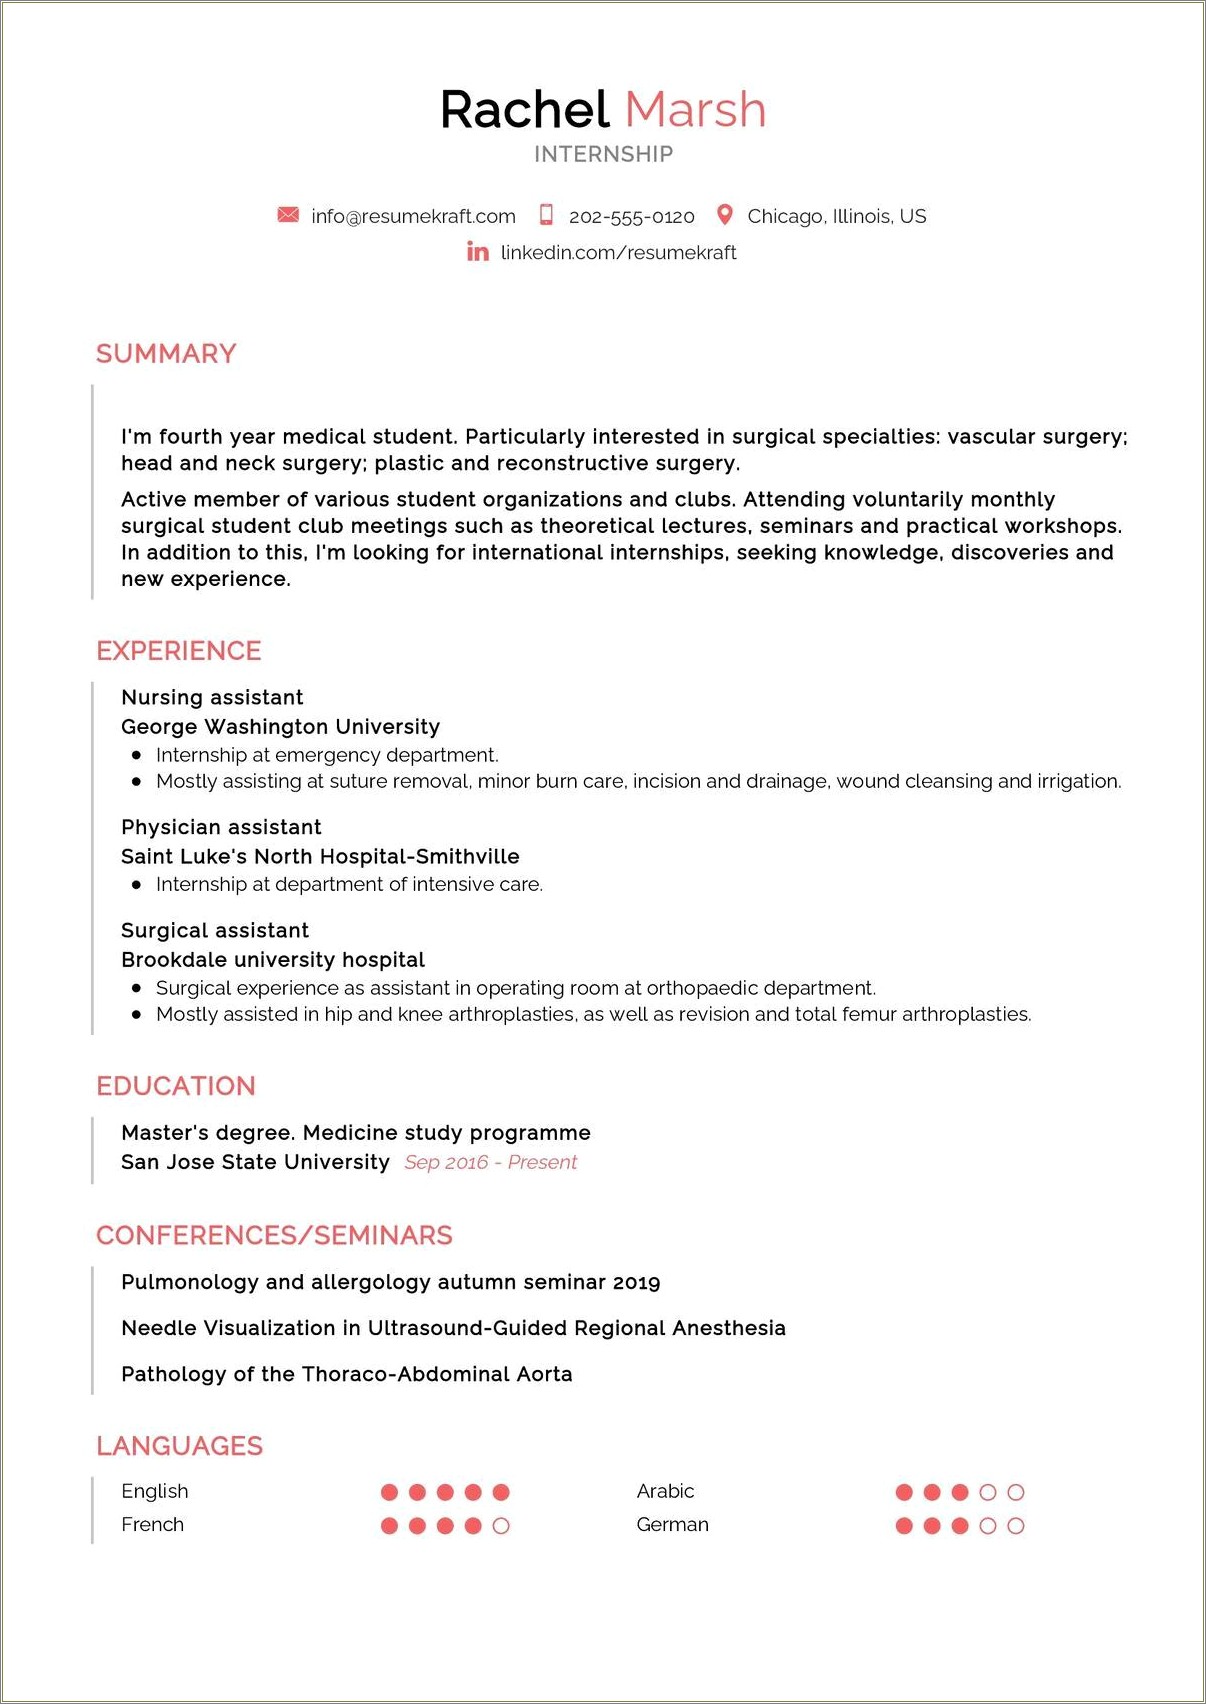 Example Of Resume With Internship Experience